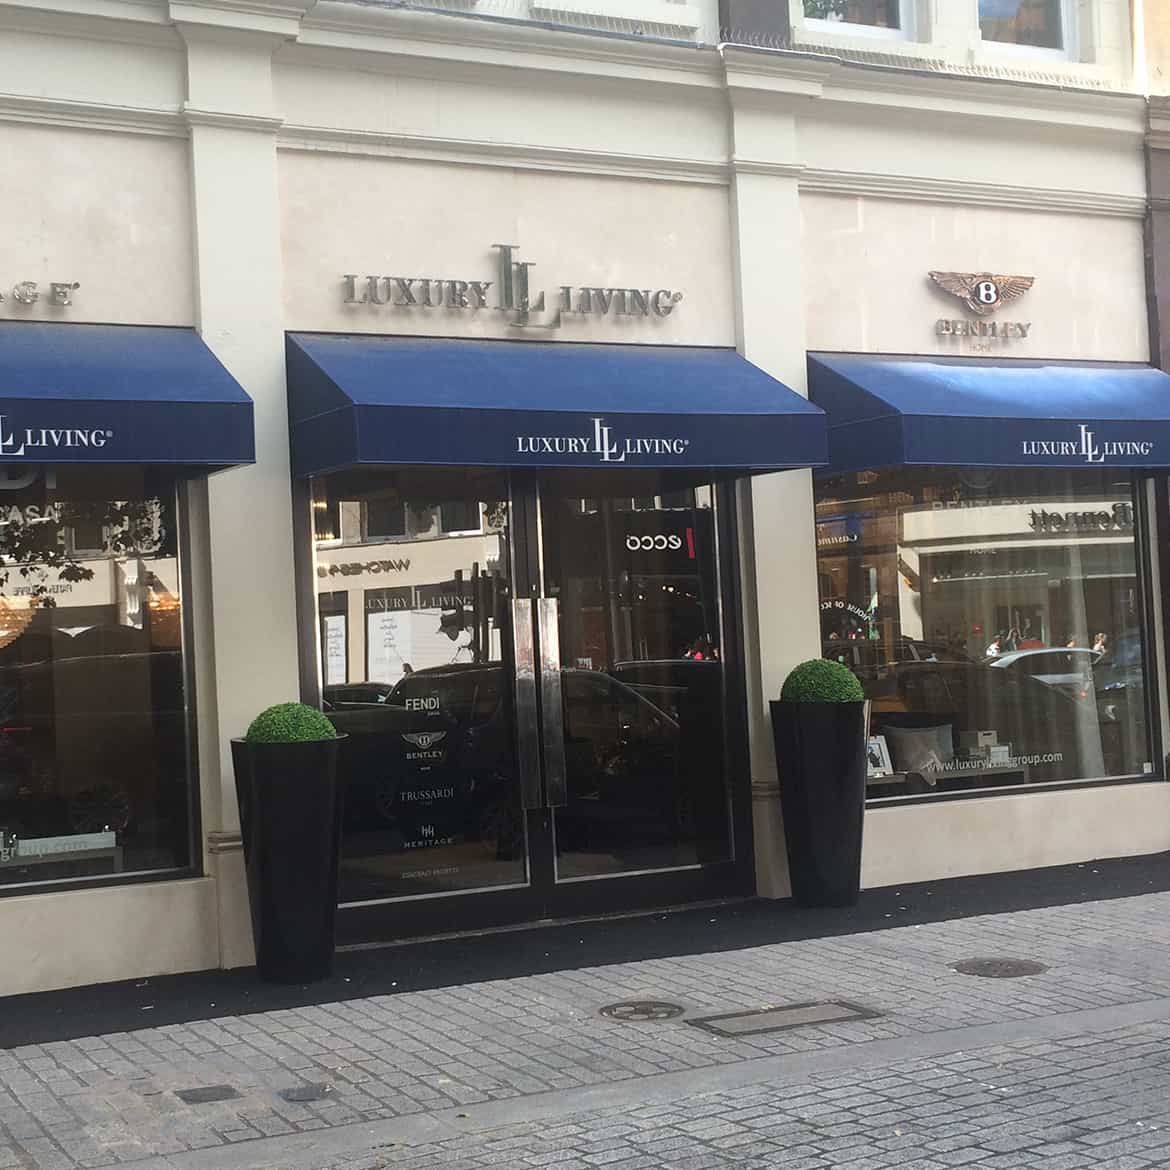 Luxury Living - Front Shop Sign